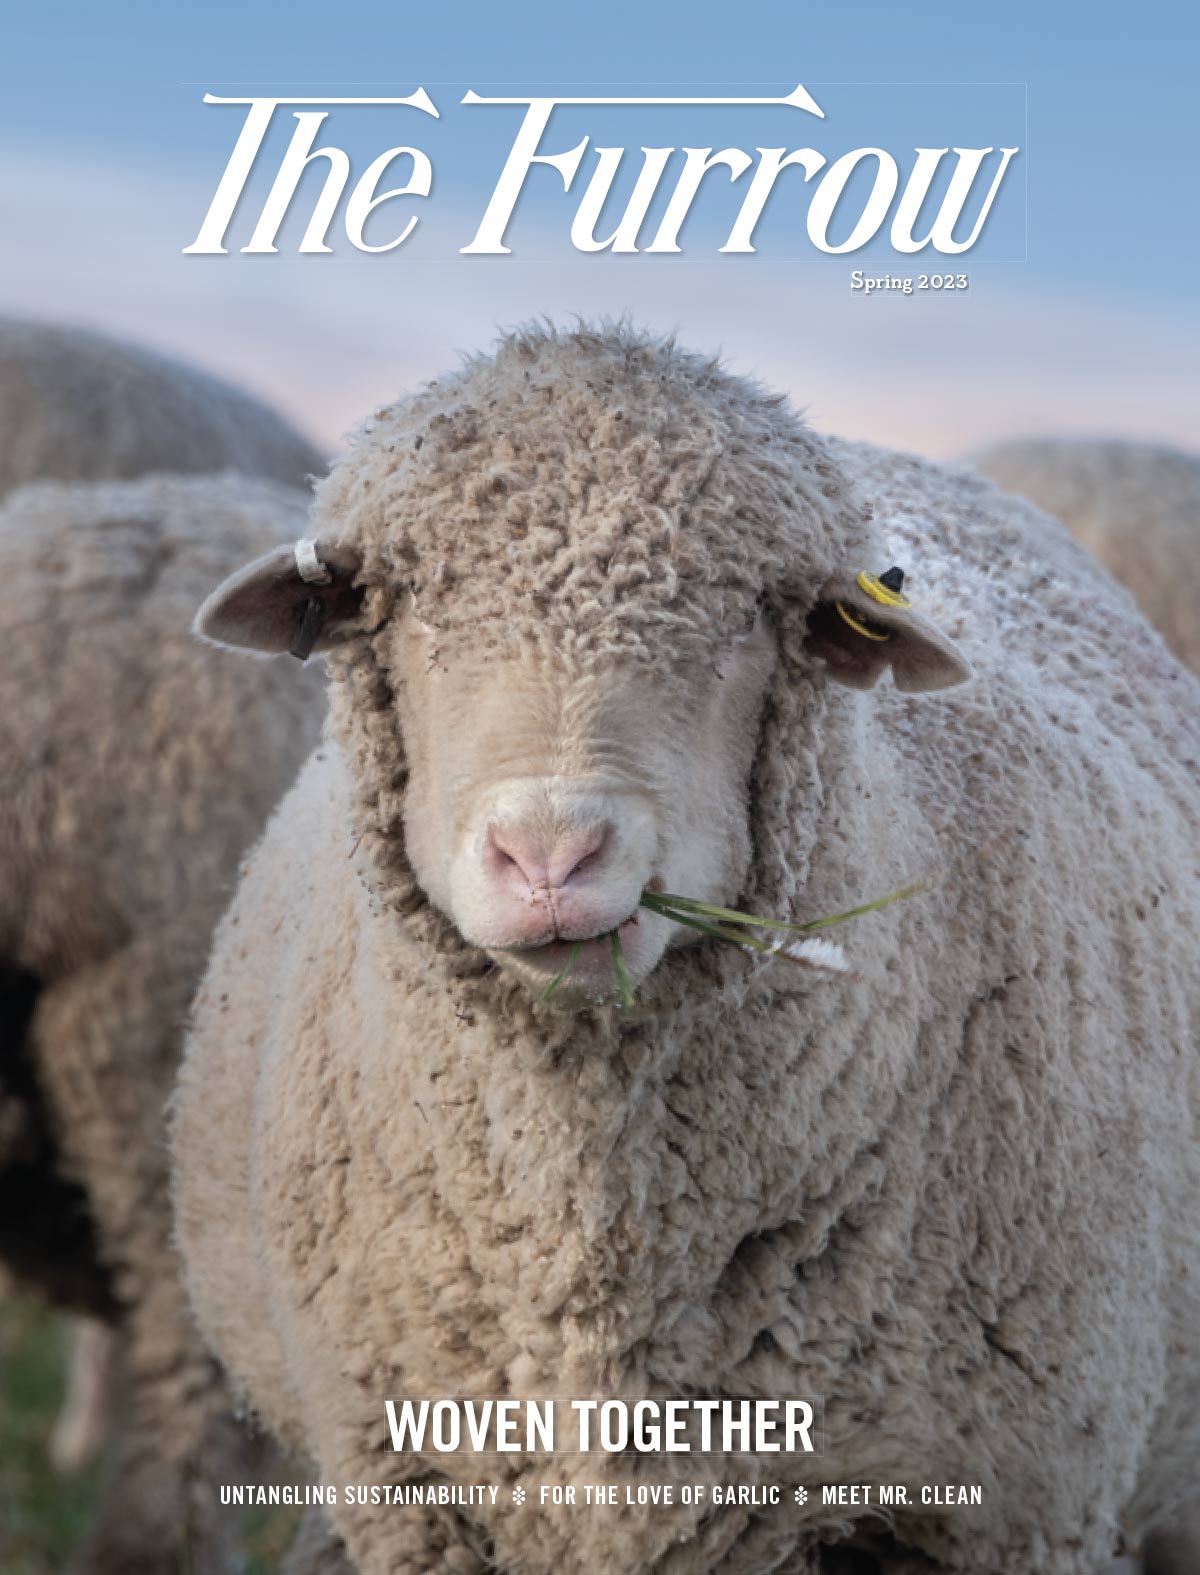 The Furrow - Spring 2023 Issue